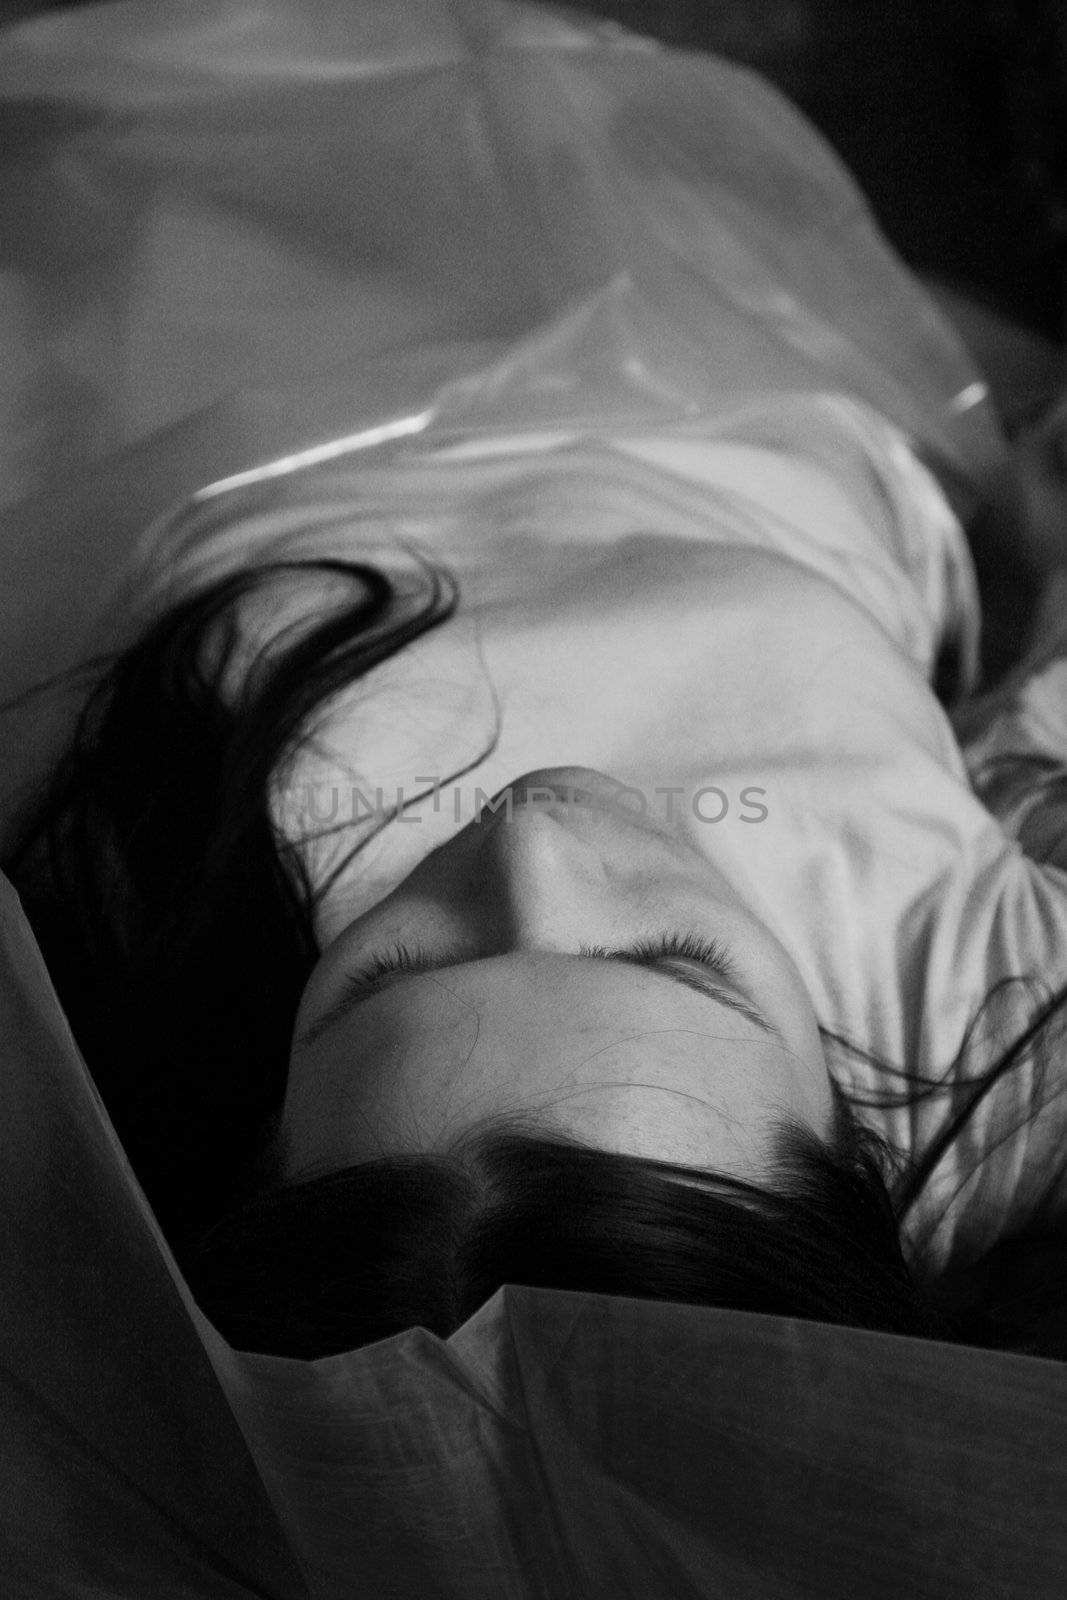 The dead beautiful girl lays in a cellophane bag